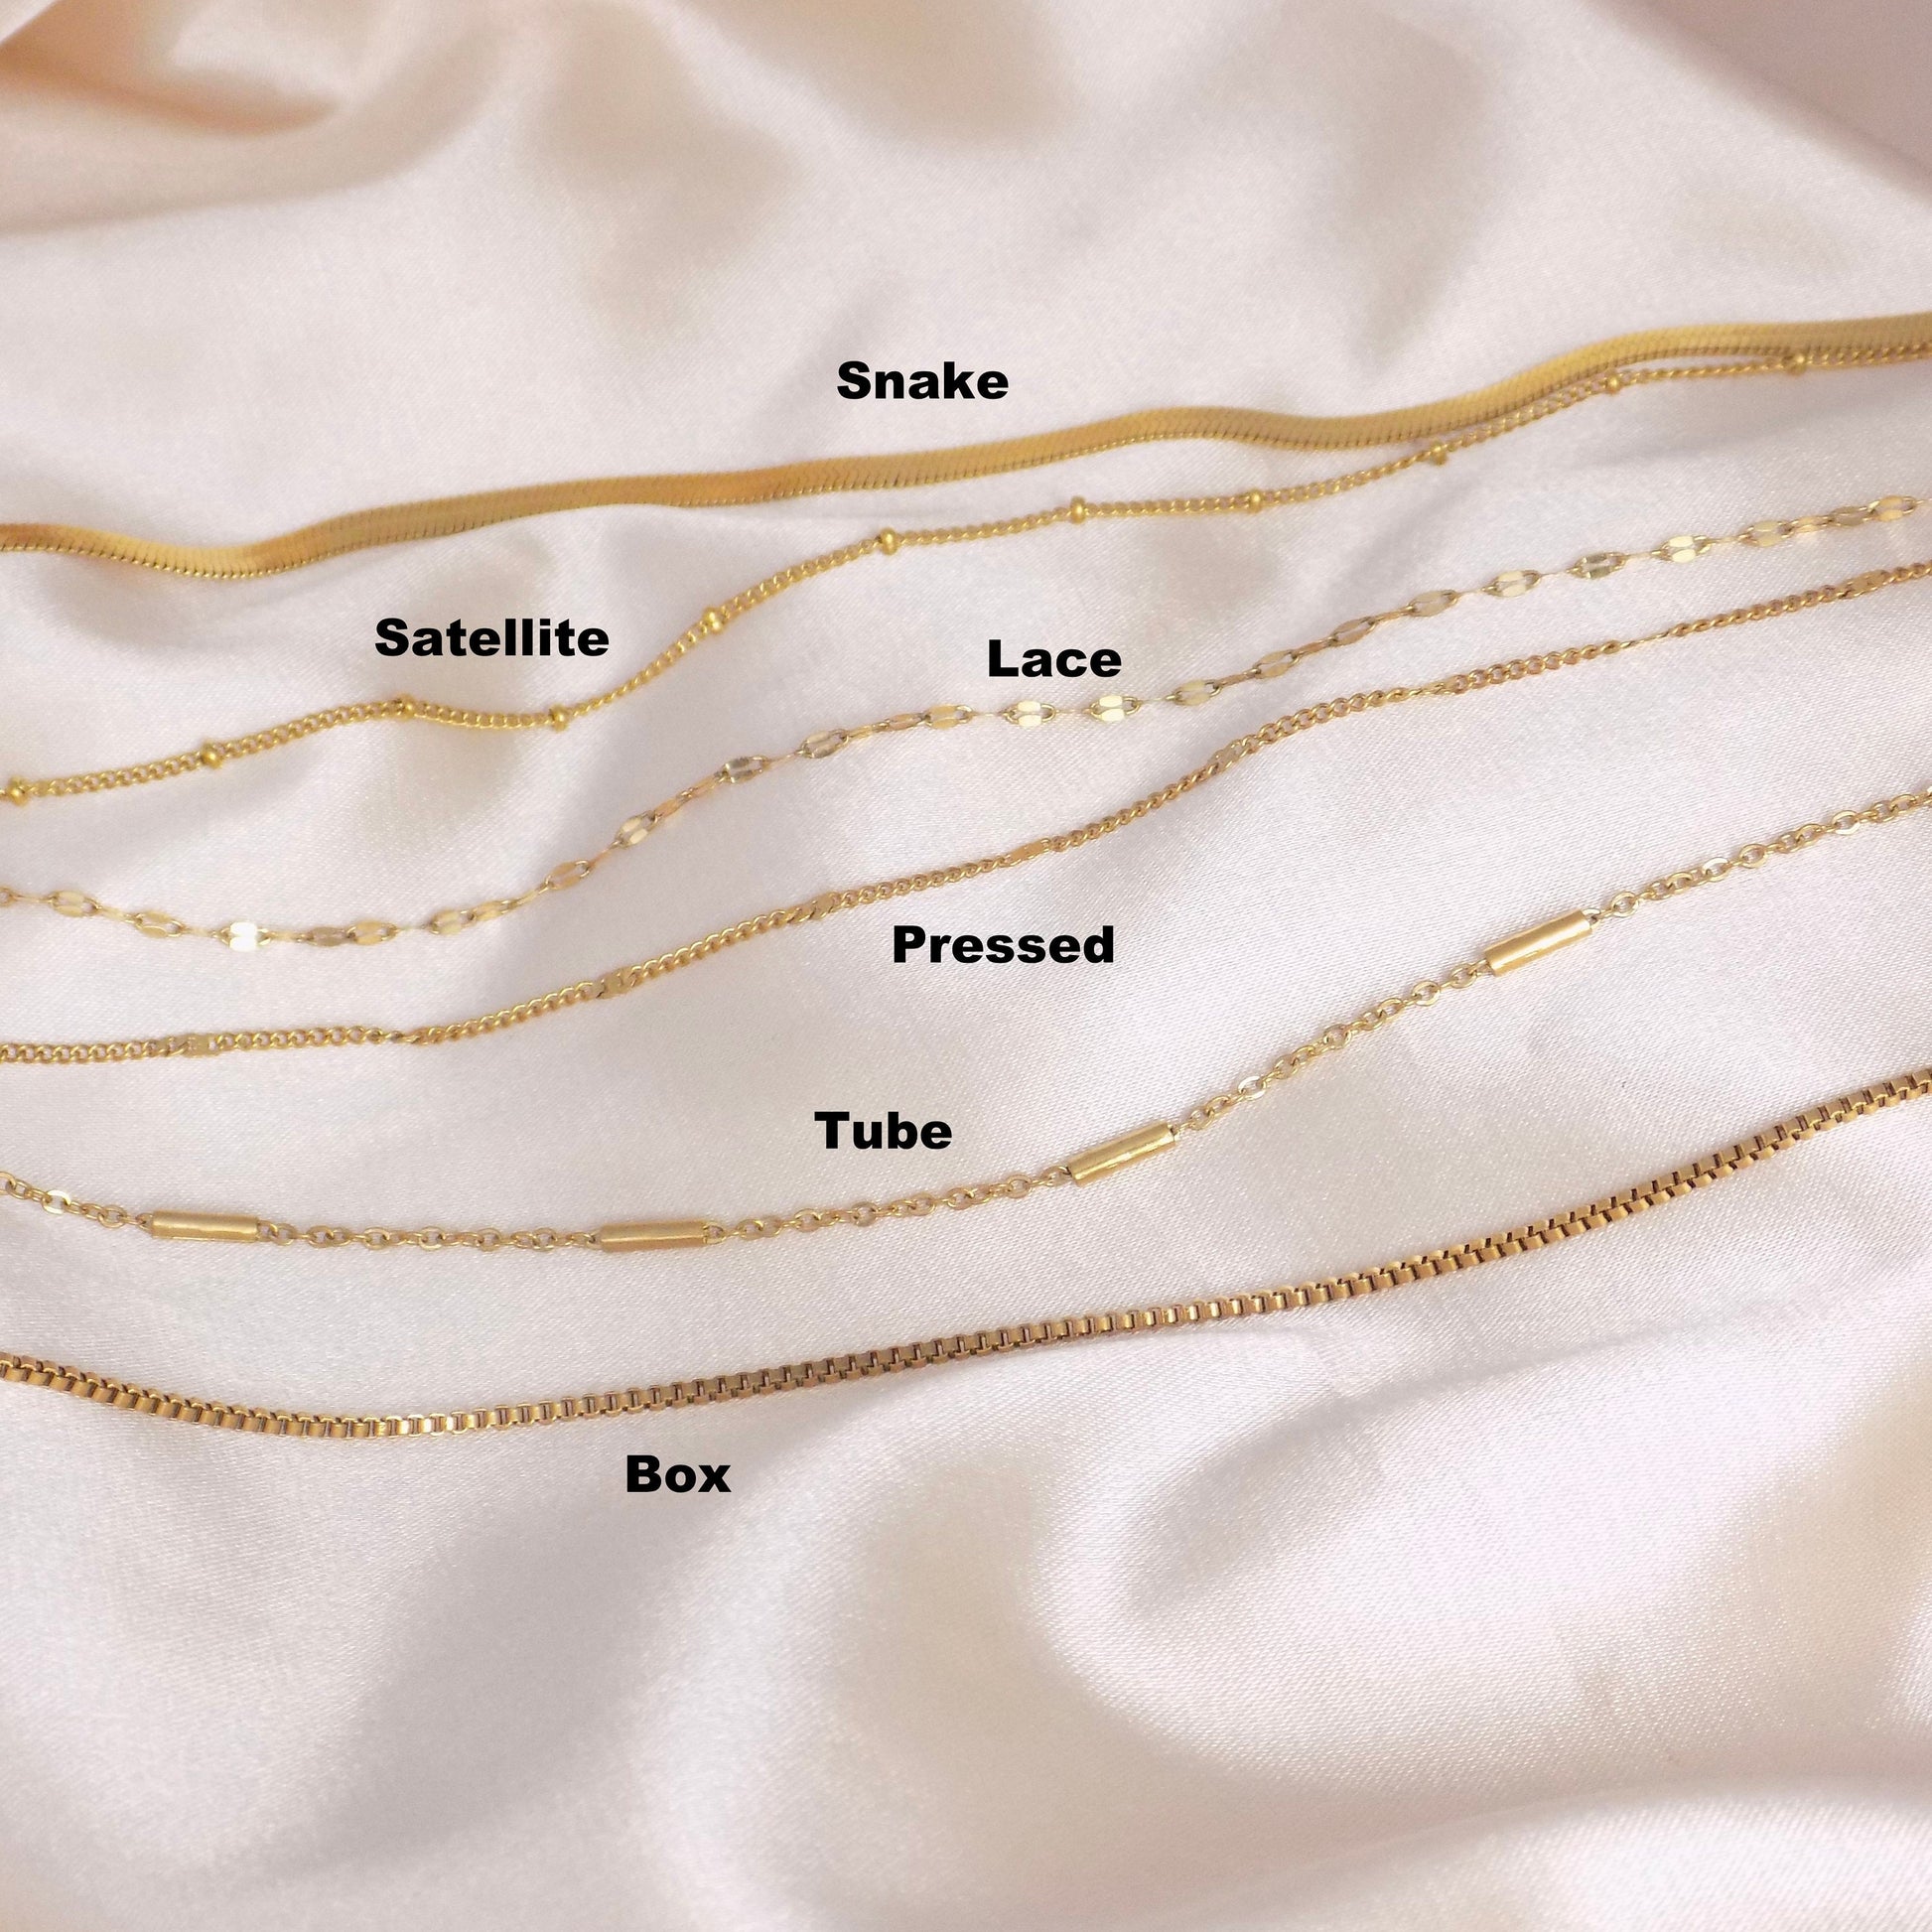 Dainty Gold Chains For Women, 18K Gold Stainless Steel Chain, Box, Satellite, Lace, Snake Chains,Finished Chain, Made to Order, Ch5